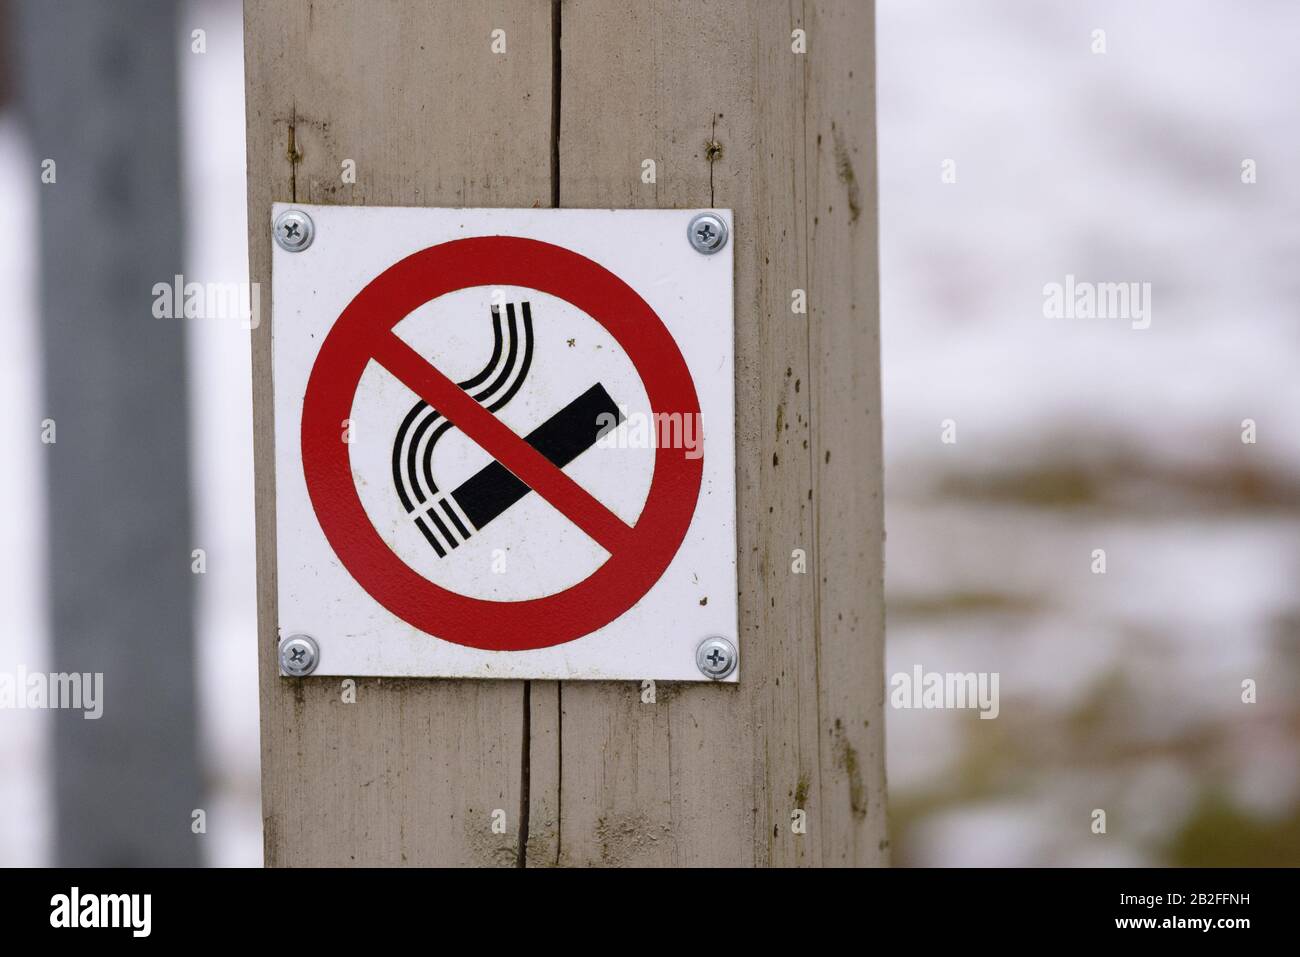 TALSI, LATVIA. 30h March 2018. No smoking sign on wooden pole at public place in city. Stock Photo